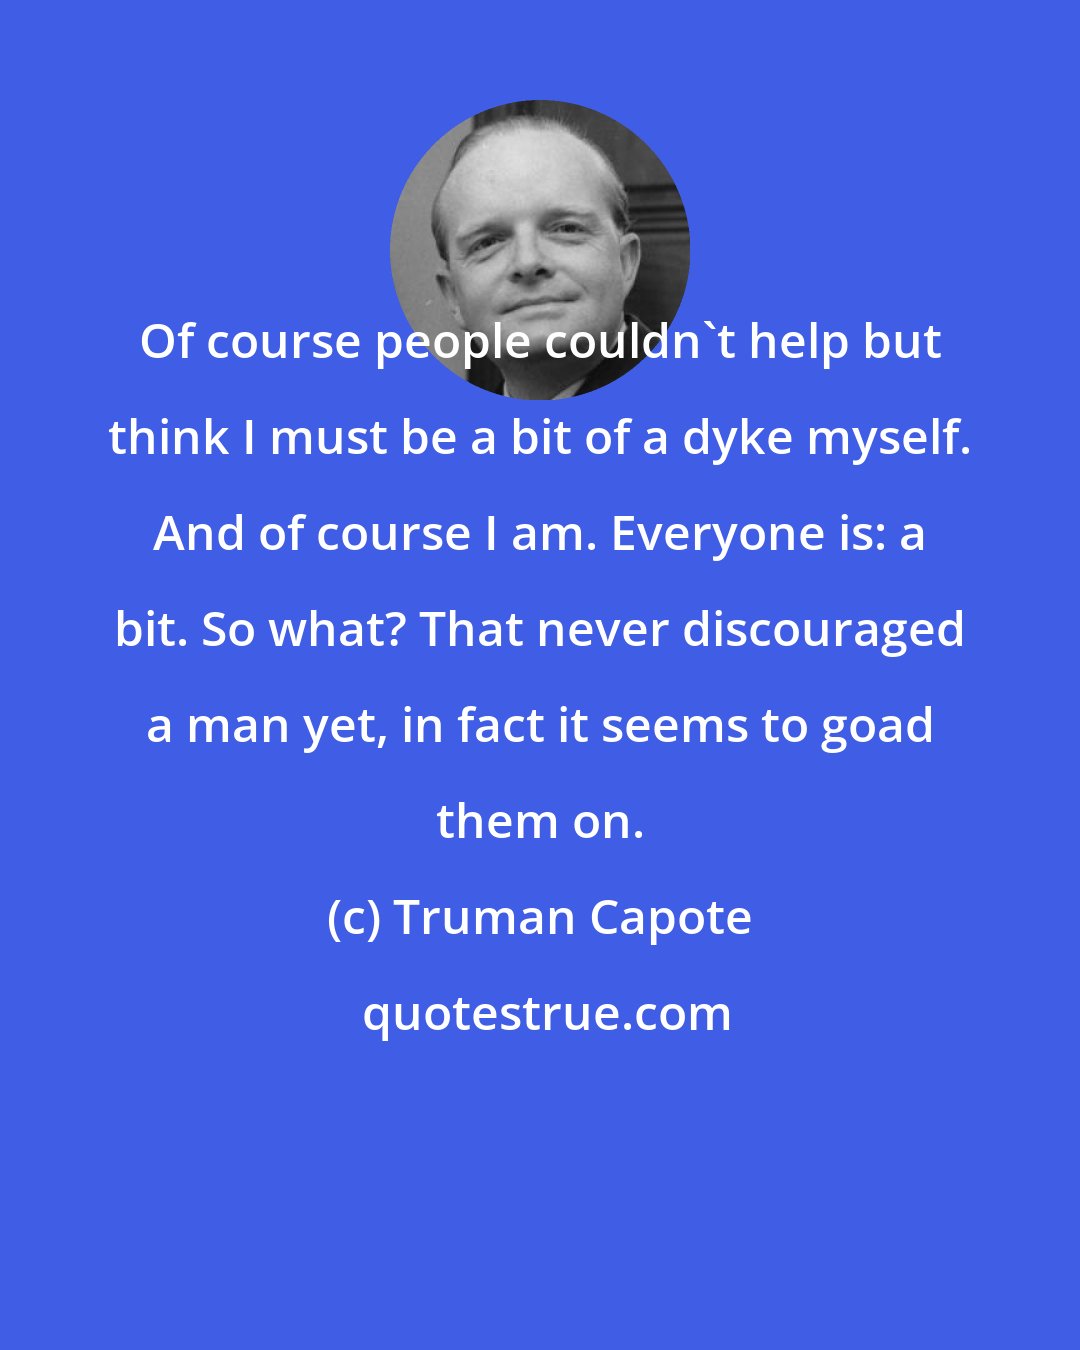 Truman Capote: Of course people couldn't help but think I must be a bit of a dyke myself. And of course I am. Everyone is: a bit. So what? That never discouraged a man yet, in fact it seems to goad them on.